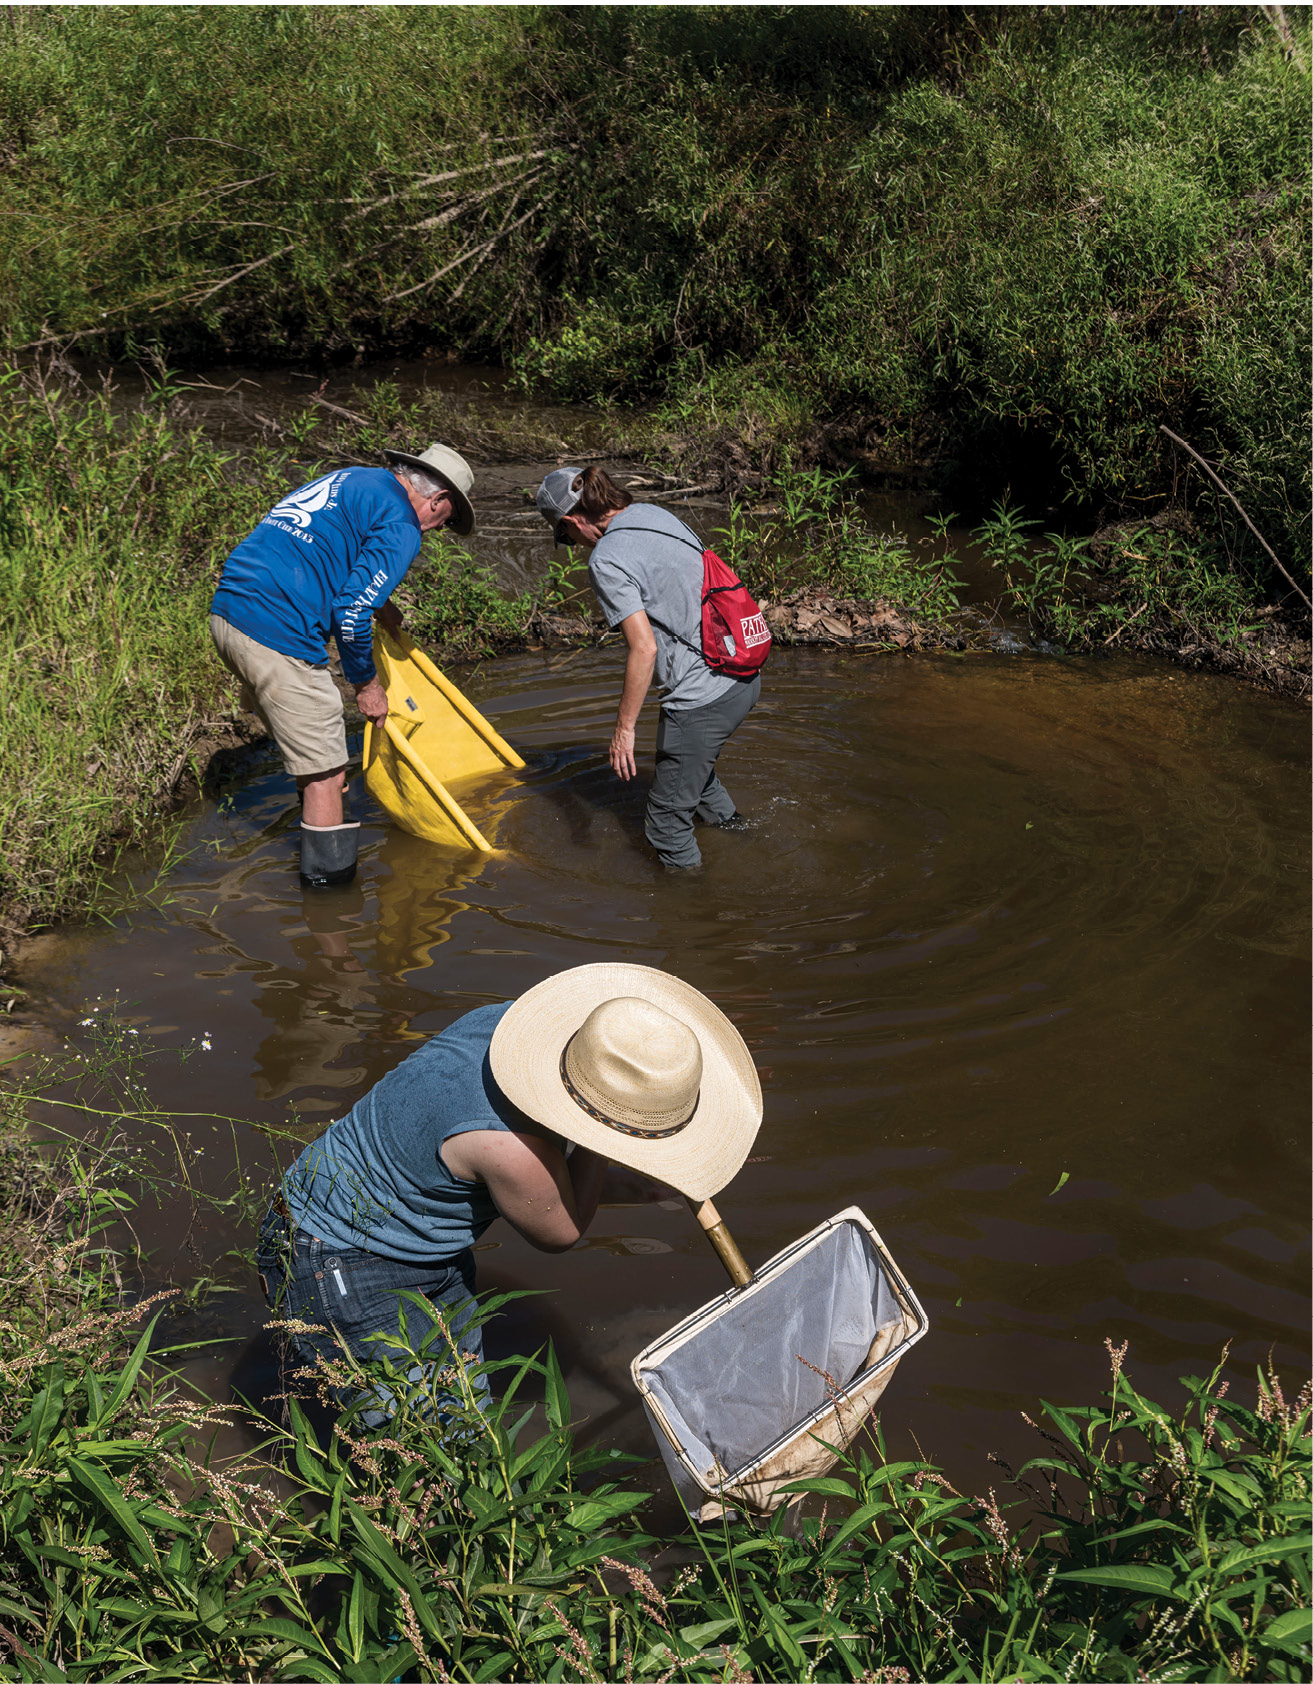 Mississippi Water Stewards conduct sampling in a small body of water.